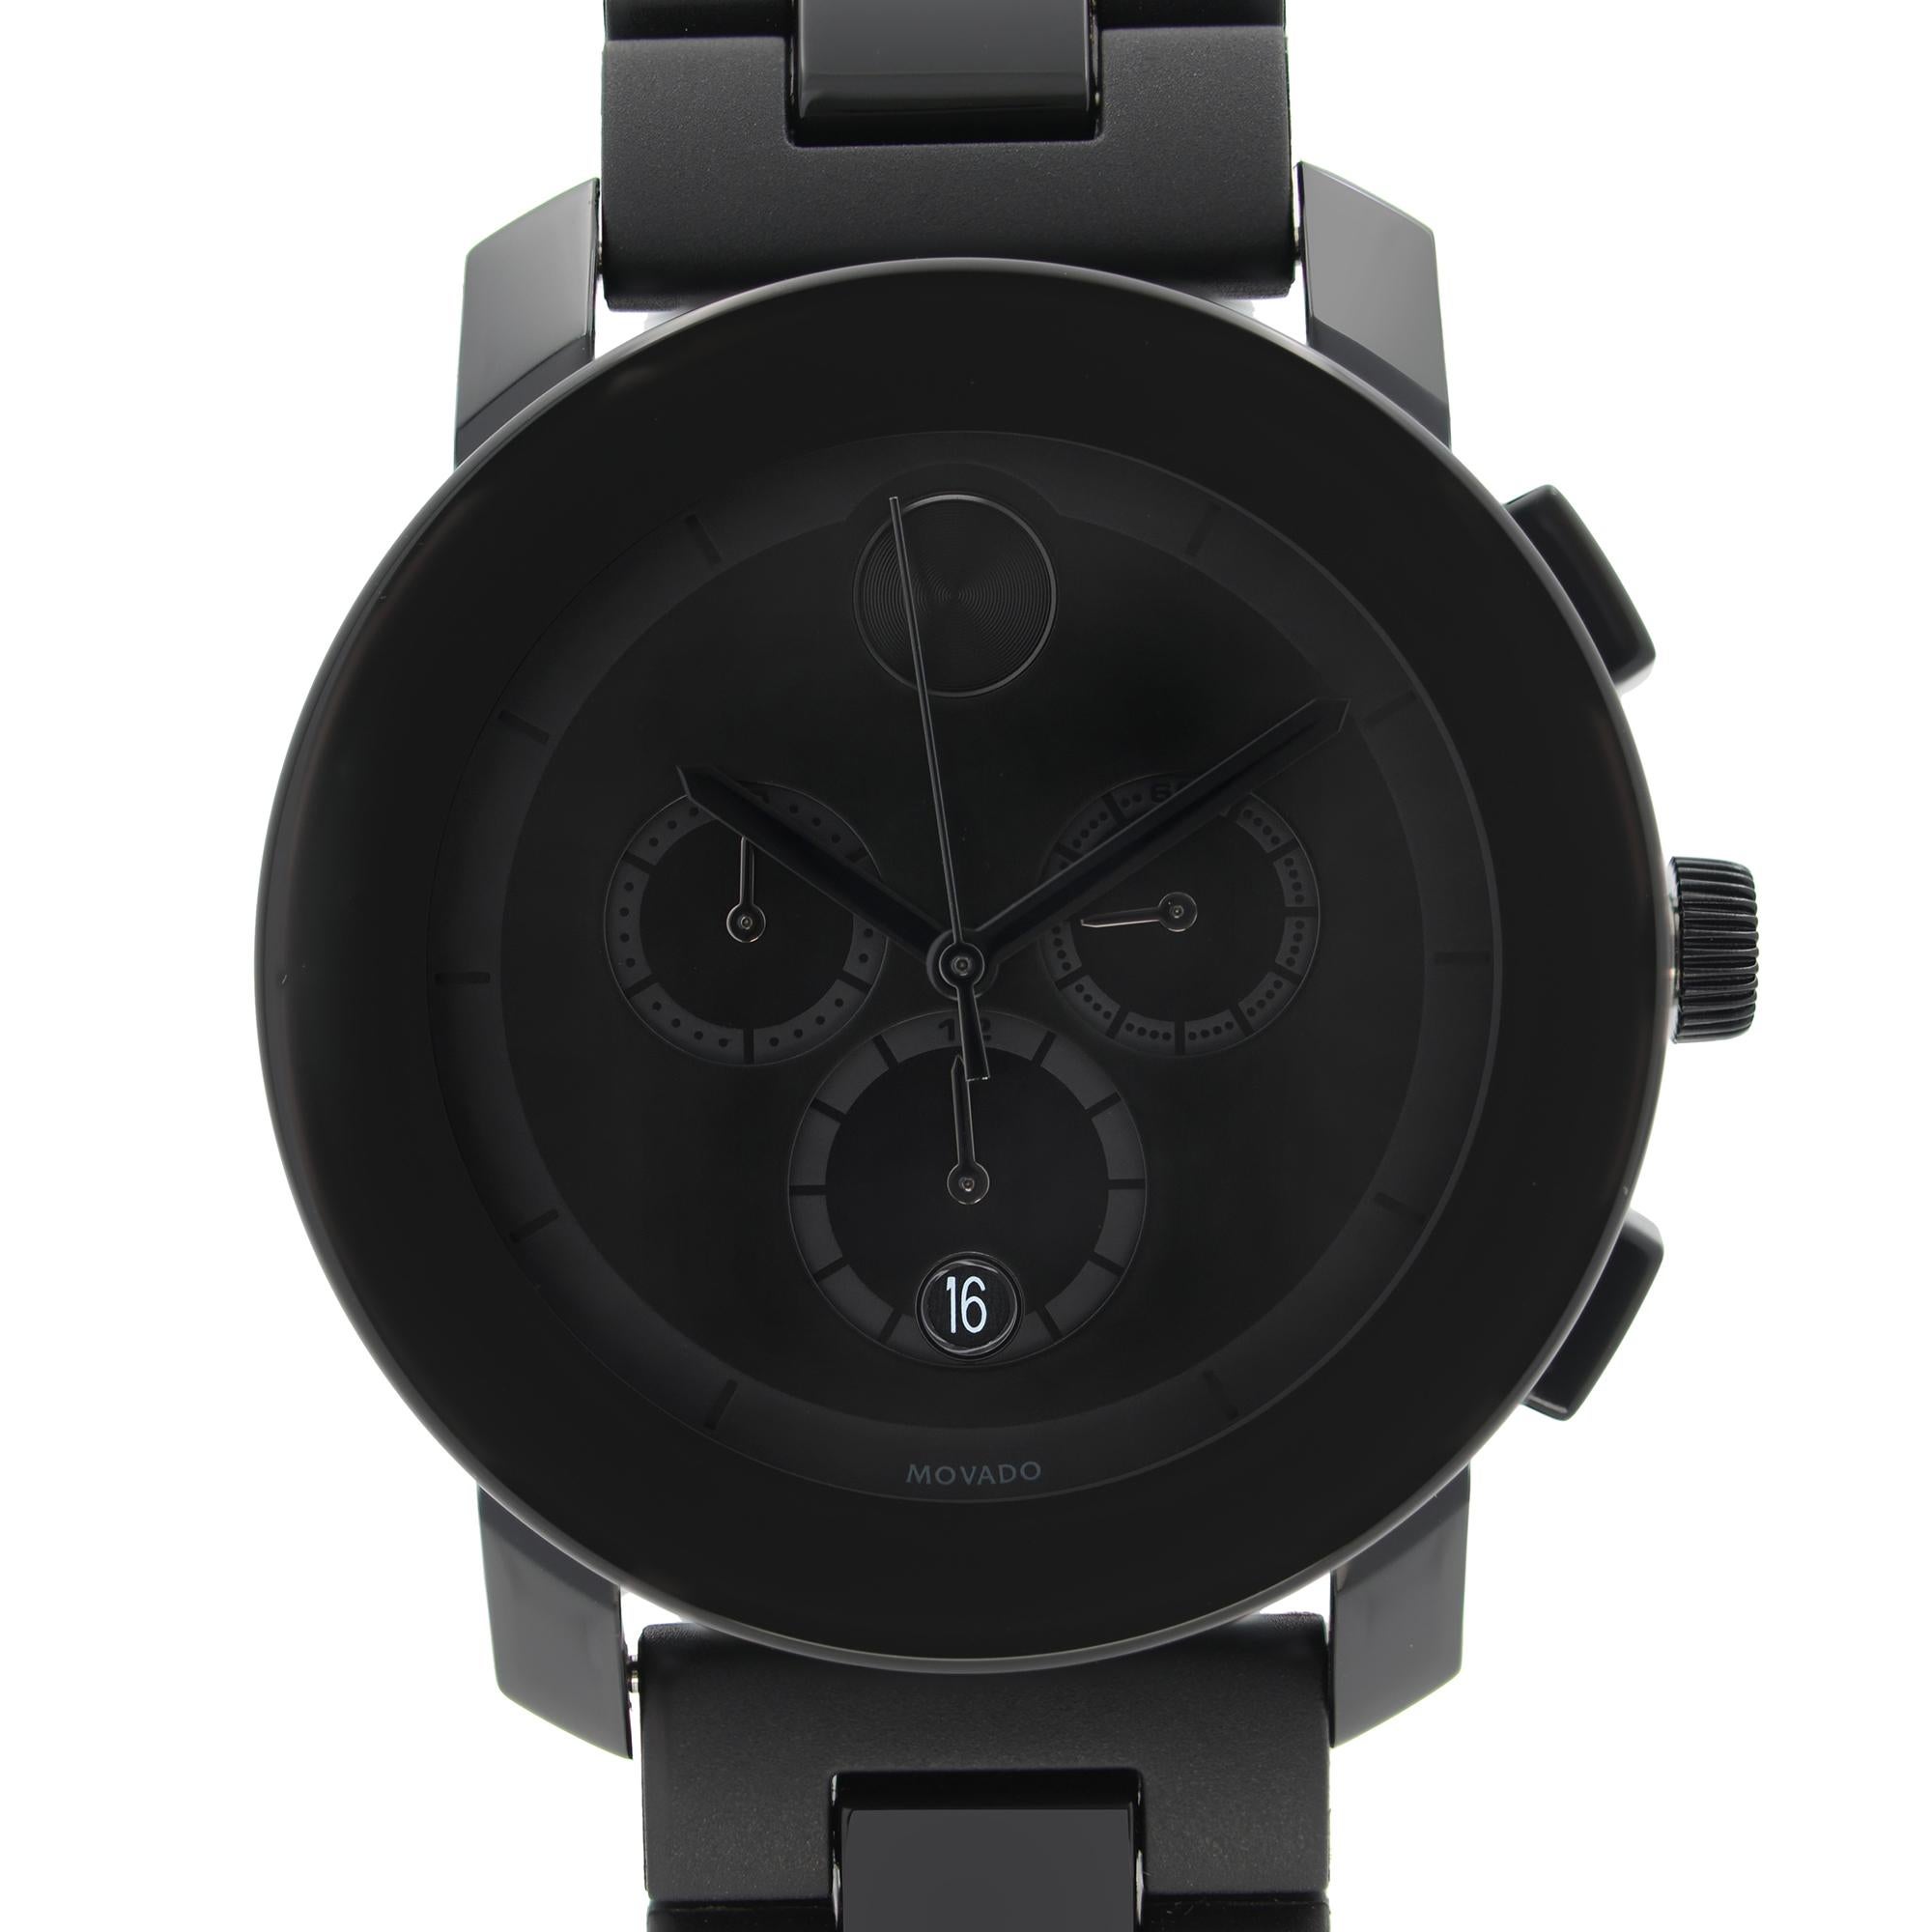 Display Model Movado Bold Chronograph Steel Plastic Resin Black Dial Quartz Men's Watch 3600048. This Beautiful Timepiece Features: Black Plastic and Stainless Steel Back Case with a Black TR90 Resin Bracelet with Plastic Center Links, Fixed Black